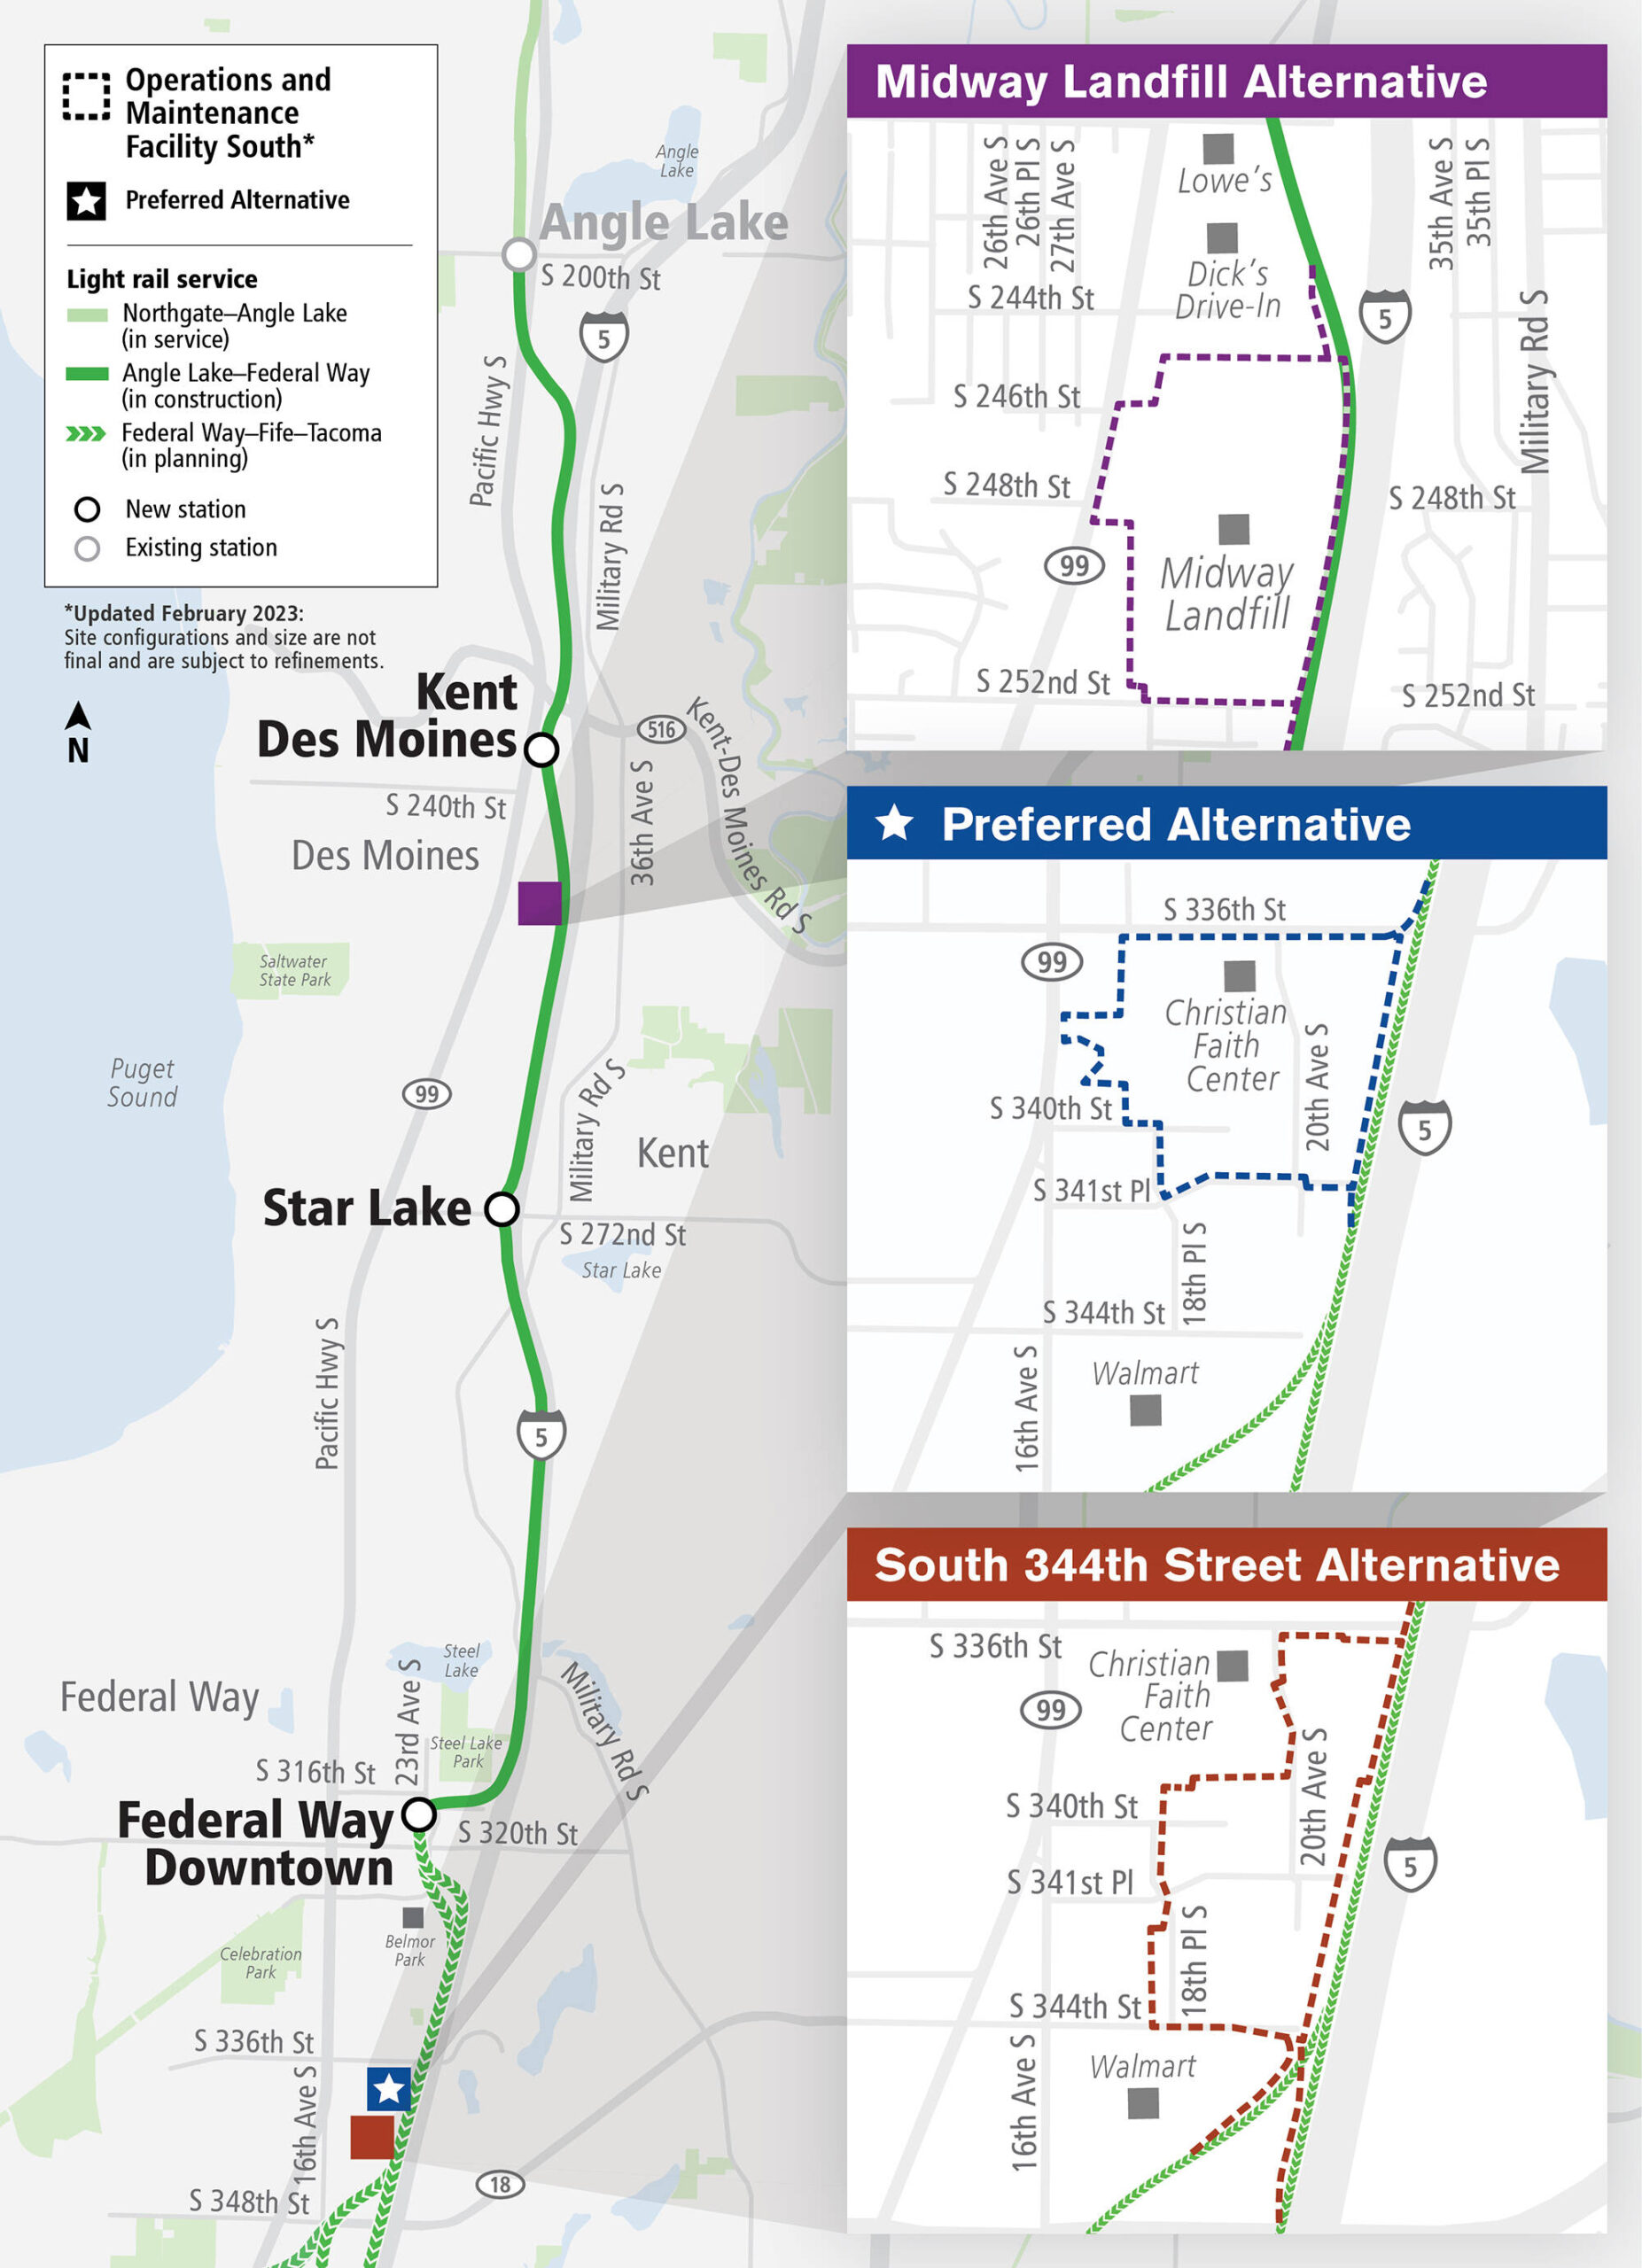 Overview of the updated footprints for the three possible alternatives for the proposed Sound Transit Operations and Maintenance Facility. Image provided by Sound Transit.